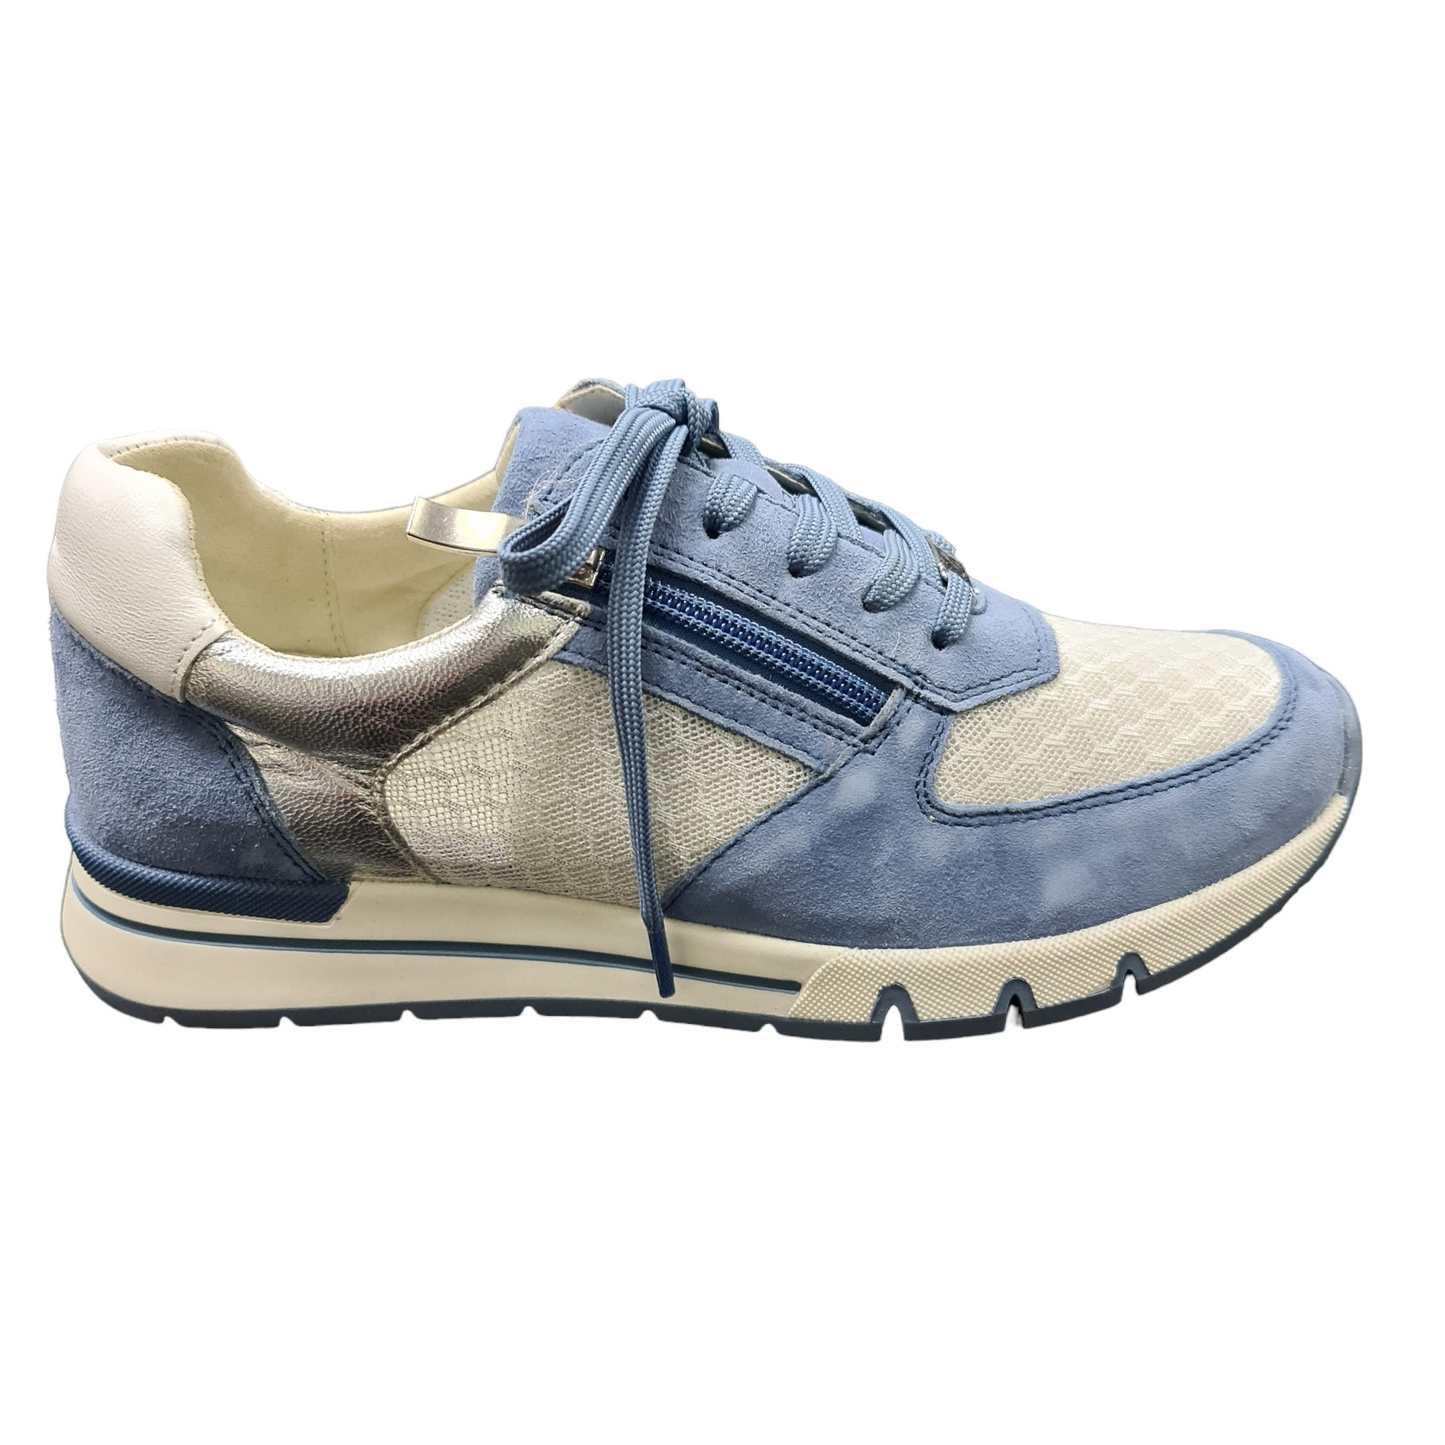 Caprice 23703-20 Blue Trainers